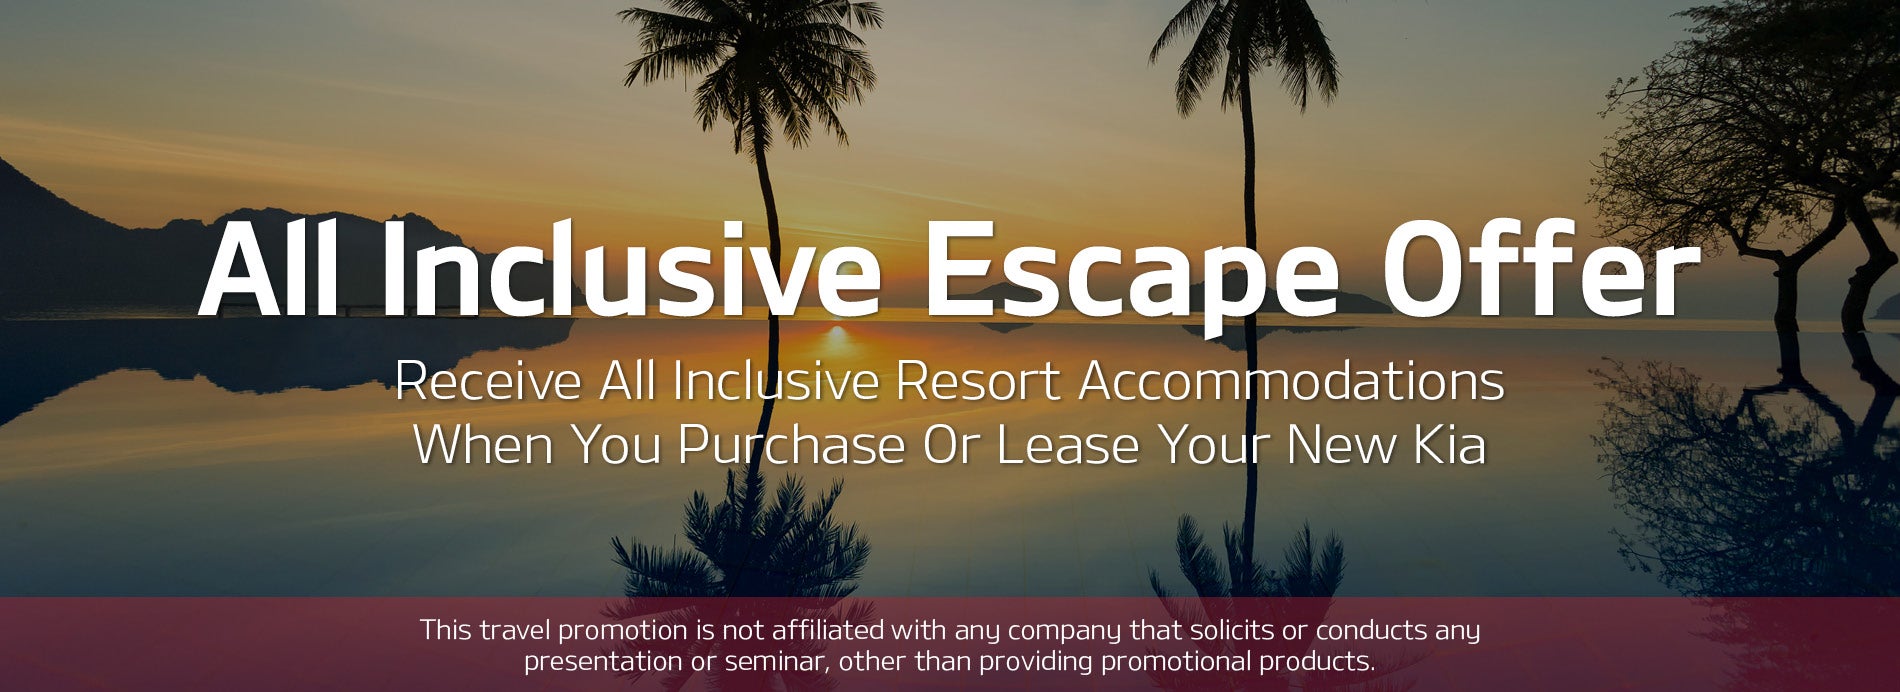 All Inclusive Escape Offer. All Inclusive Resort Accommodations. This travel promotion is not affiliated with any company that solicits or conducts any presentation or seminar, other than providing promotional products.